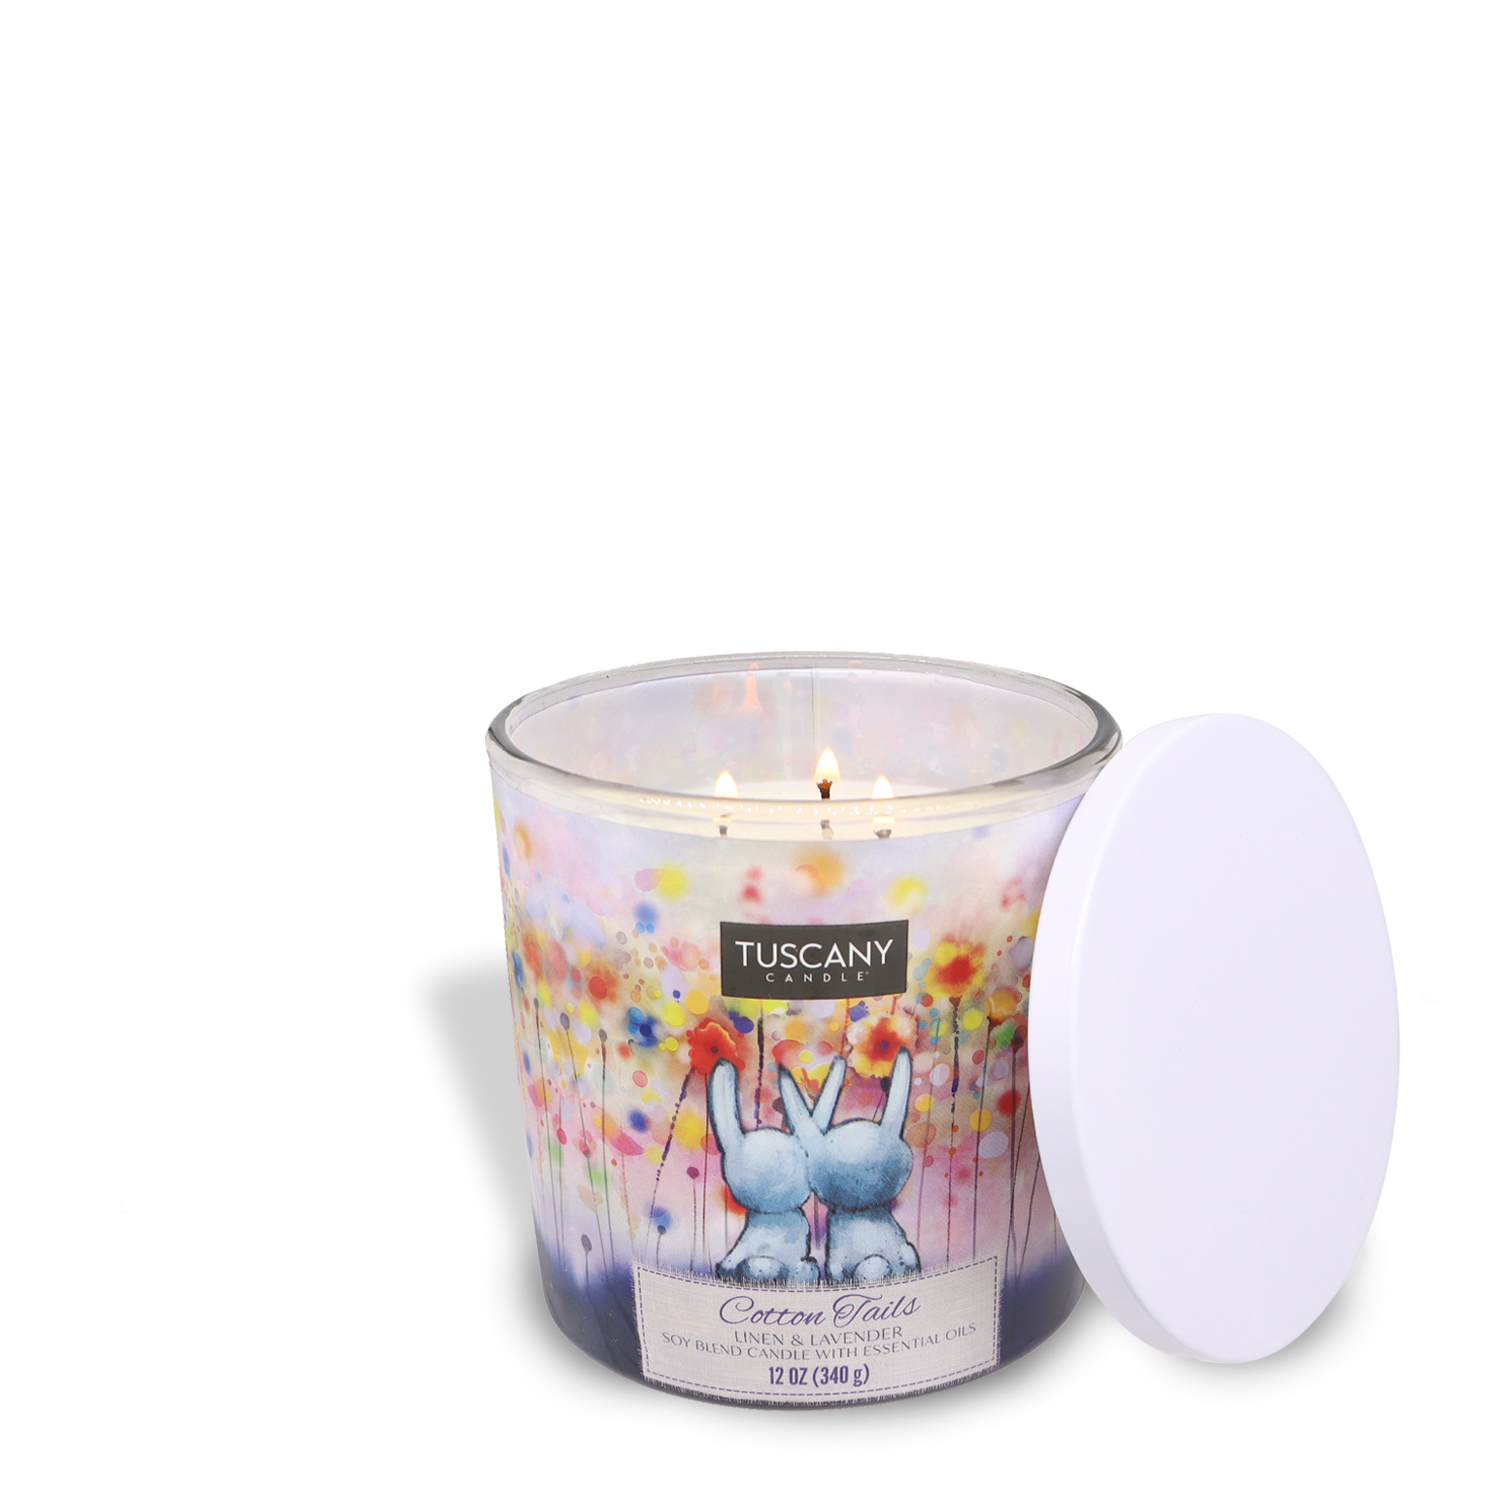 A Tuscany Candle® SEASONAL calming jar with a lid and a Cotton Tails Long-Lasting Scented Jar Candle (12 oz) inside.